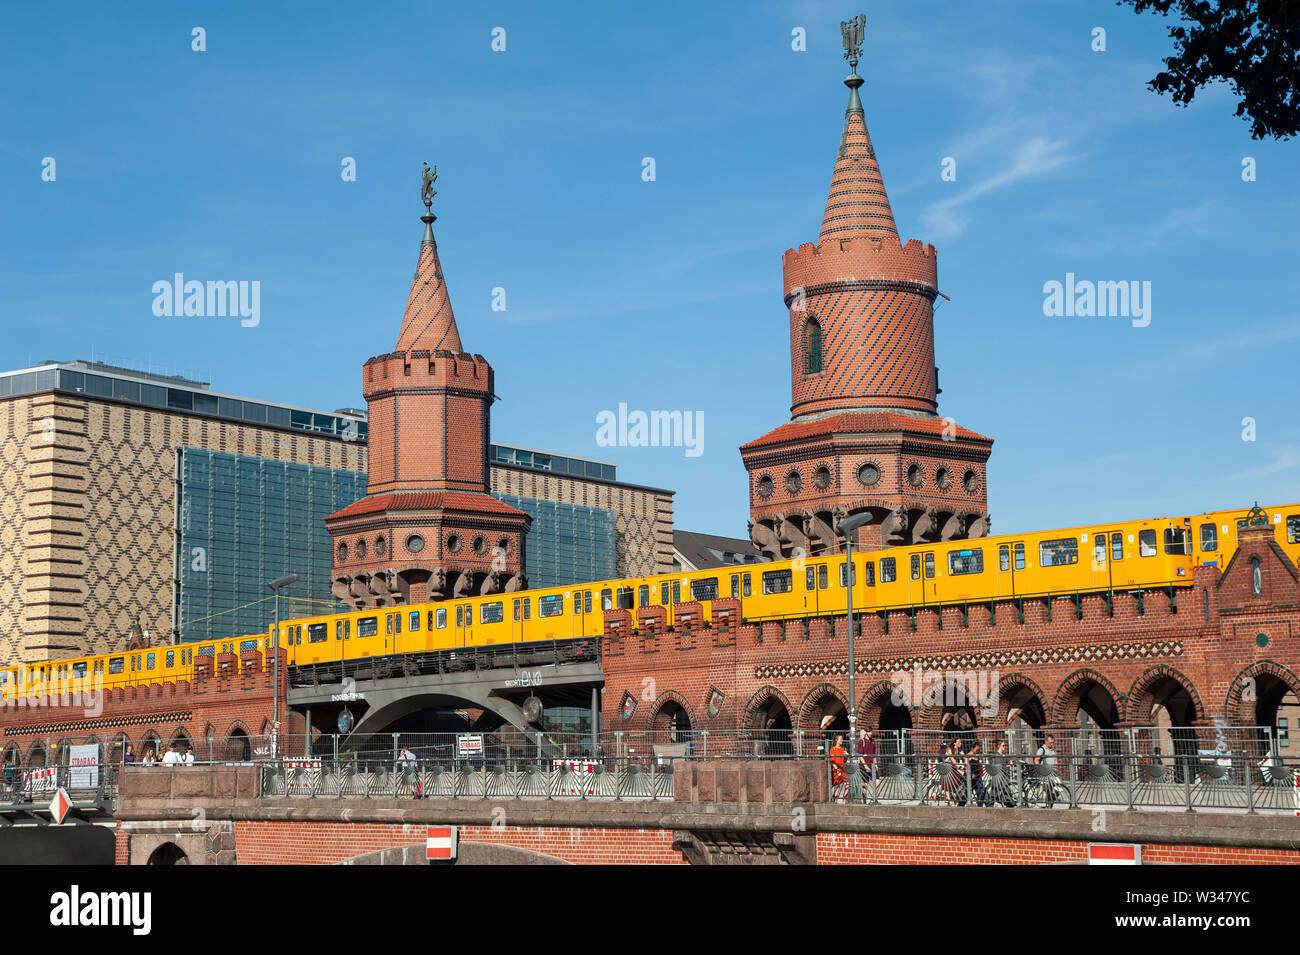 24.06.2019, Berlin, Germany, Europe - A subway traverses the Oberbaum Bridge that connects the districts of Kreuzberg and Friedrichshain. Stock Photo